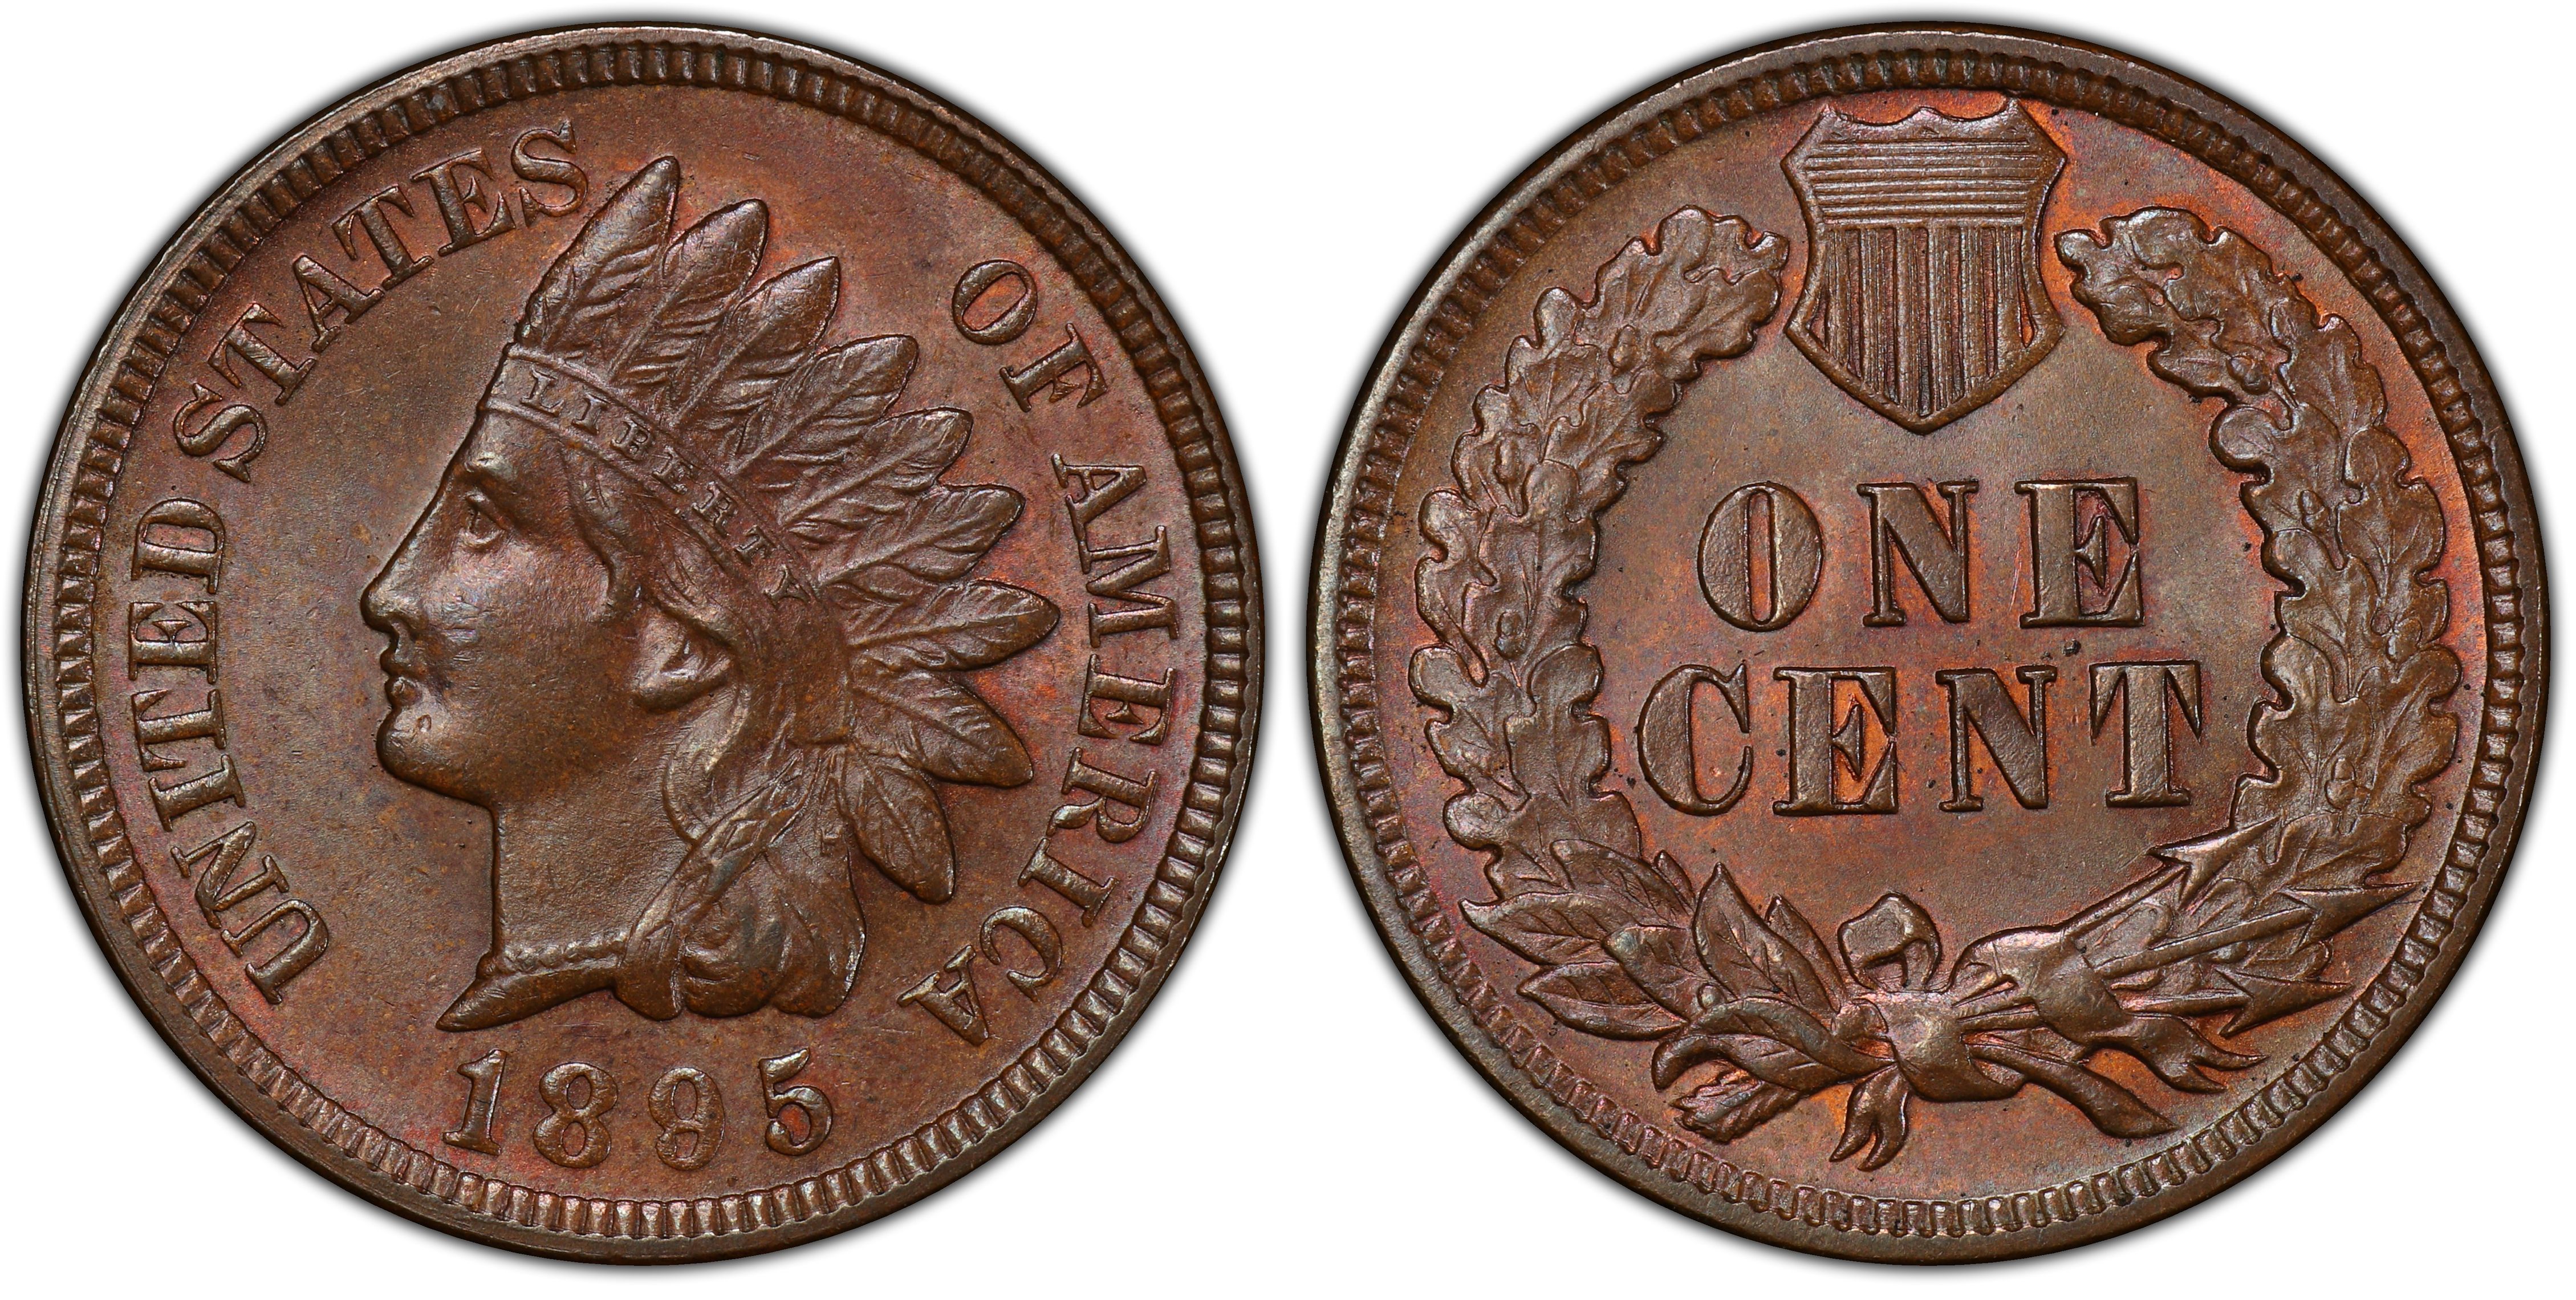 1894 INDIAN HEAD CENT PENNY CIRCULATED GRADE GOOD VERY GOOD 95% COPPER COIN 